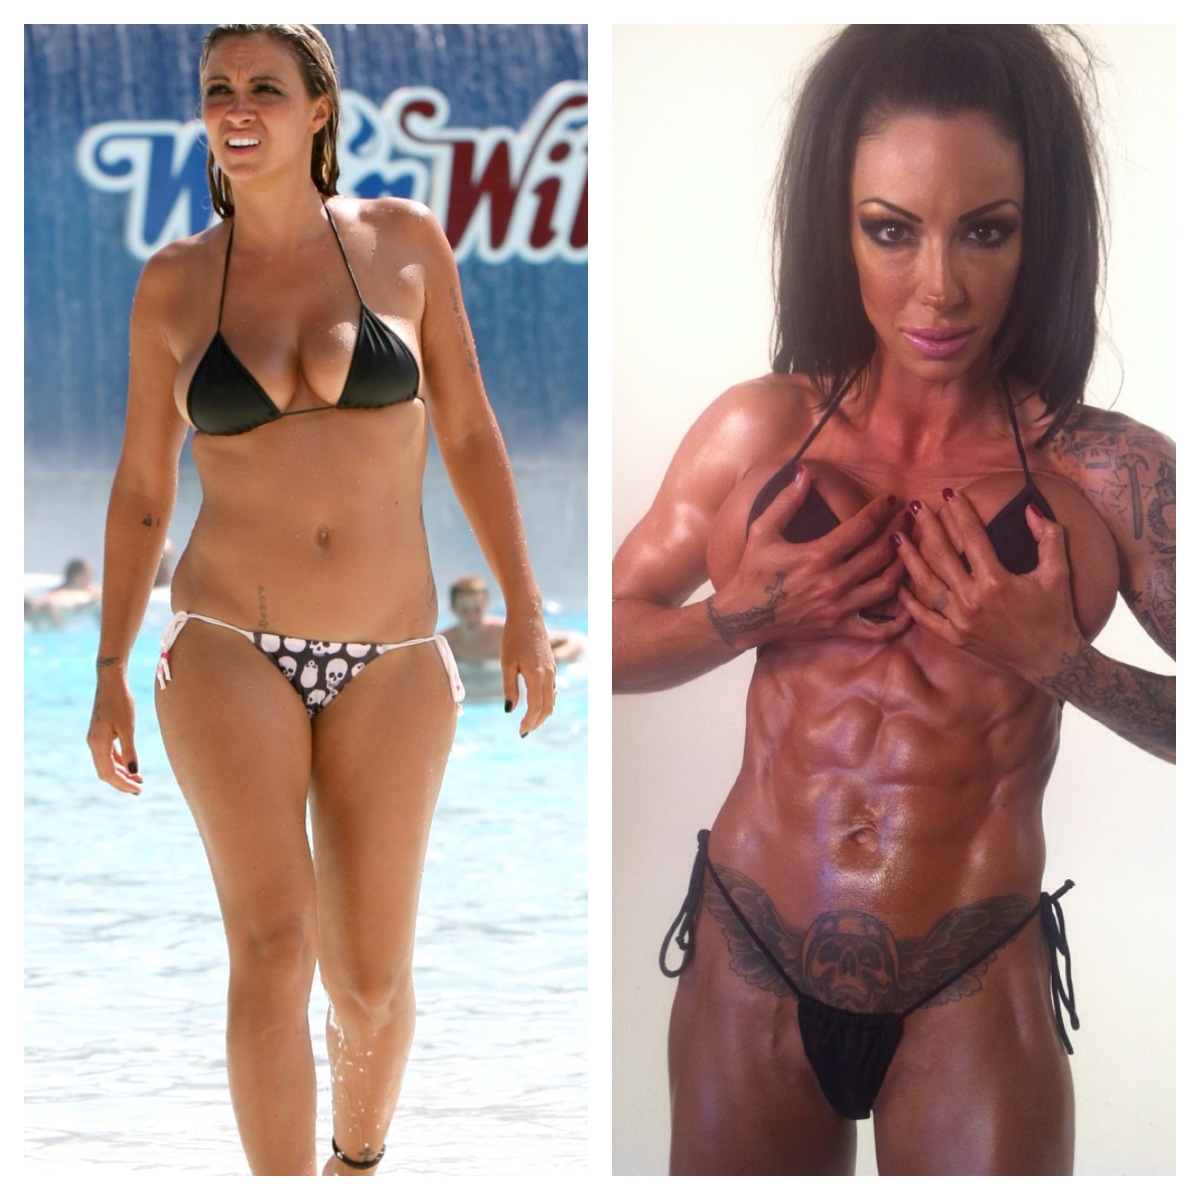 An image of Jodie Marsh Before and after 2007-2011 goes here.